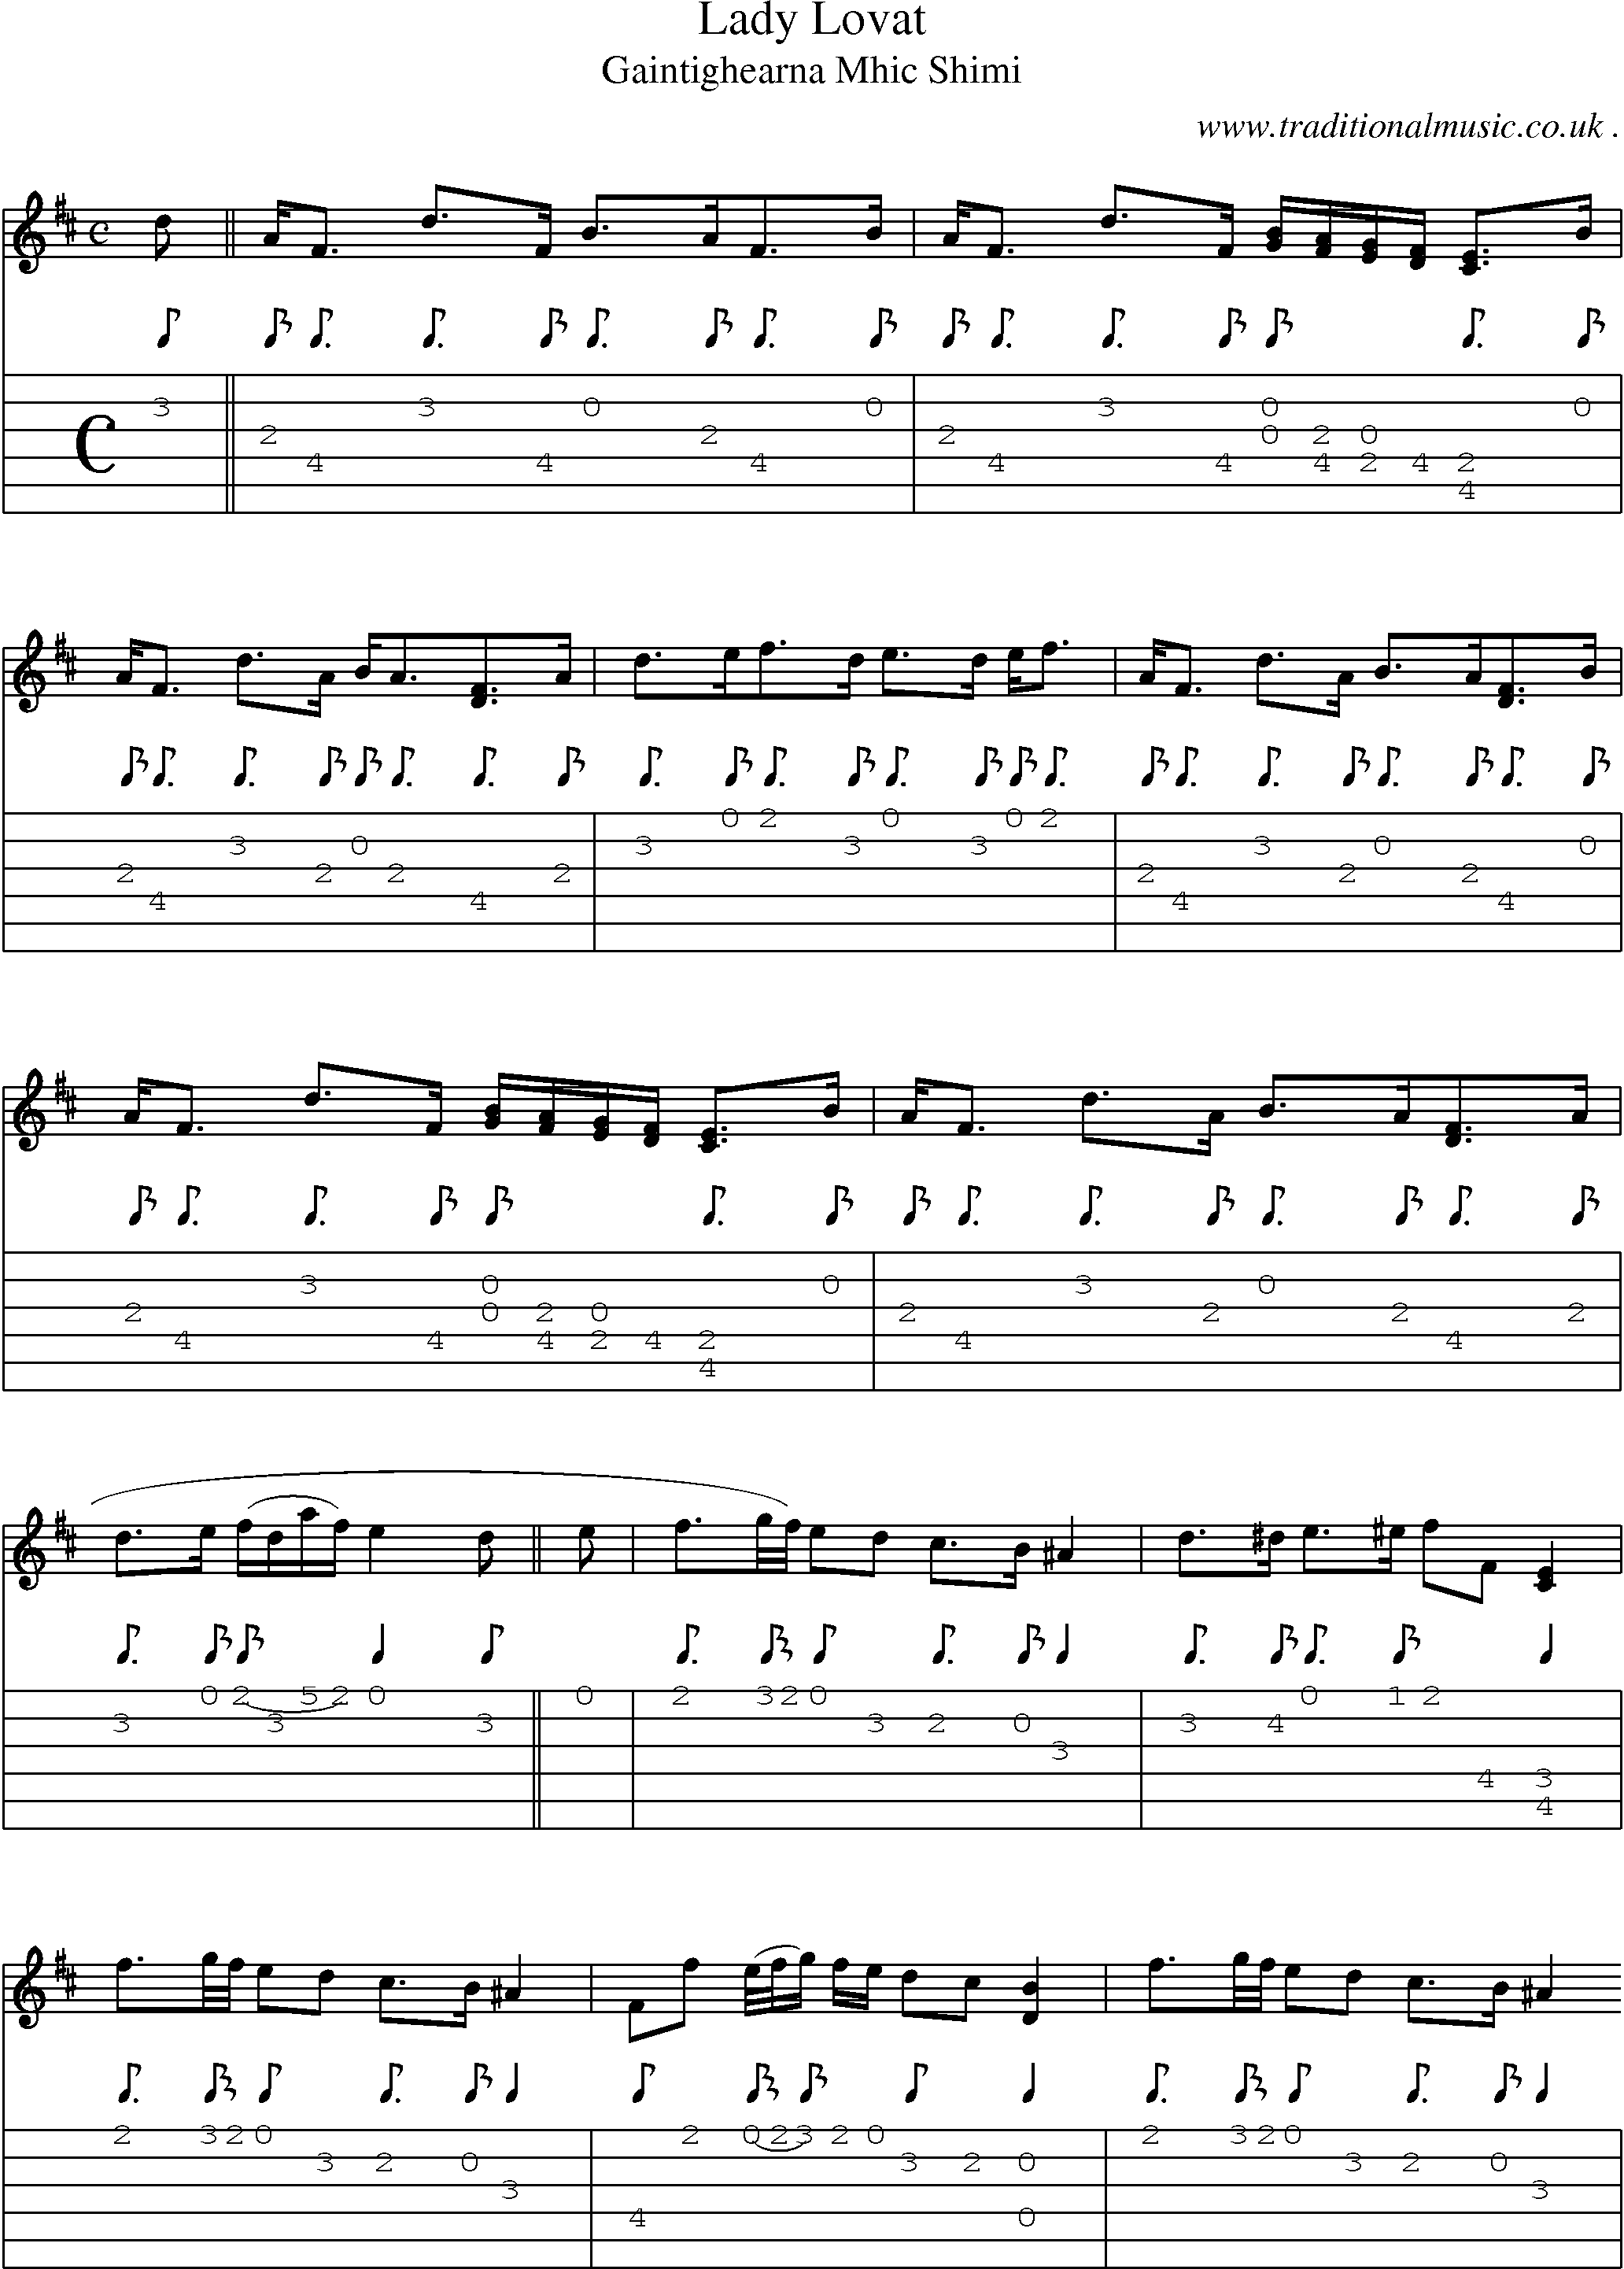 Sheet-music  score, Chords and Guitar Tabs for Lady Lovat